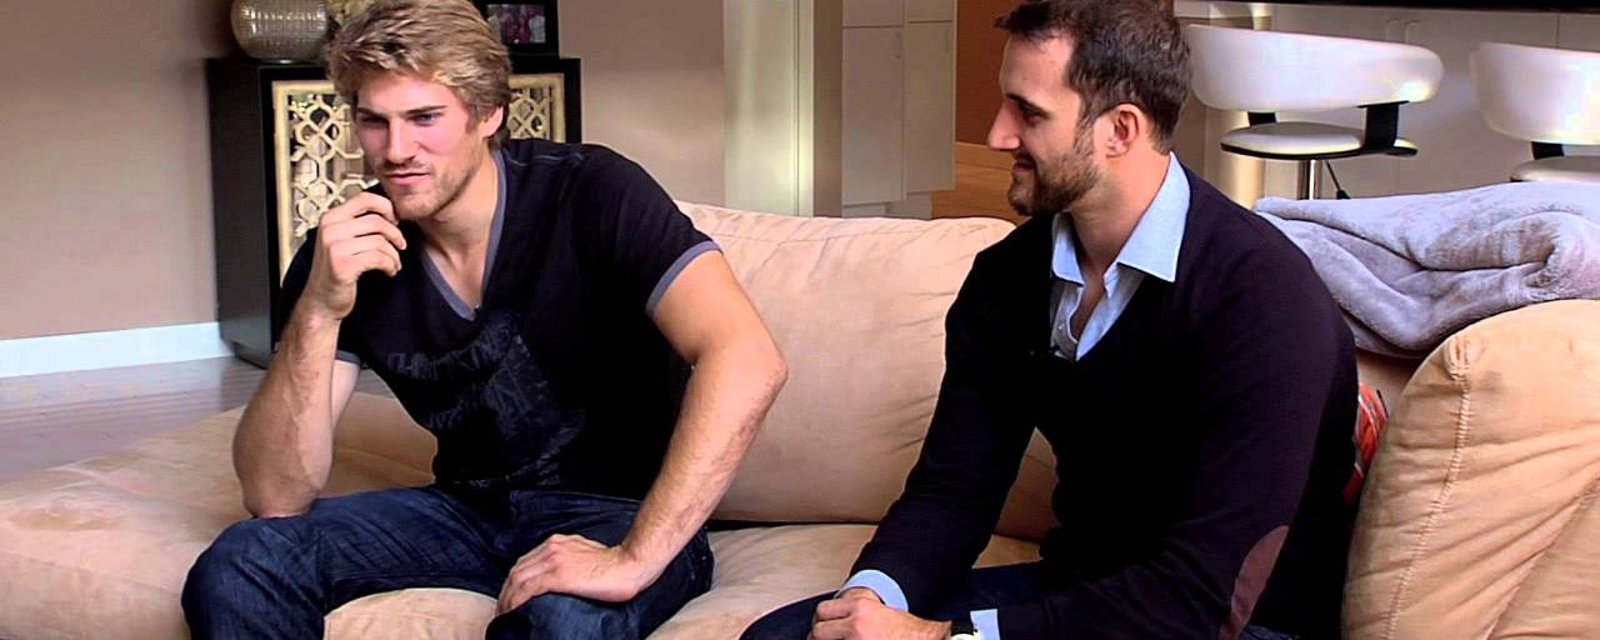 Foligno brothers shared the same bedroom until one of them got married